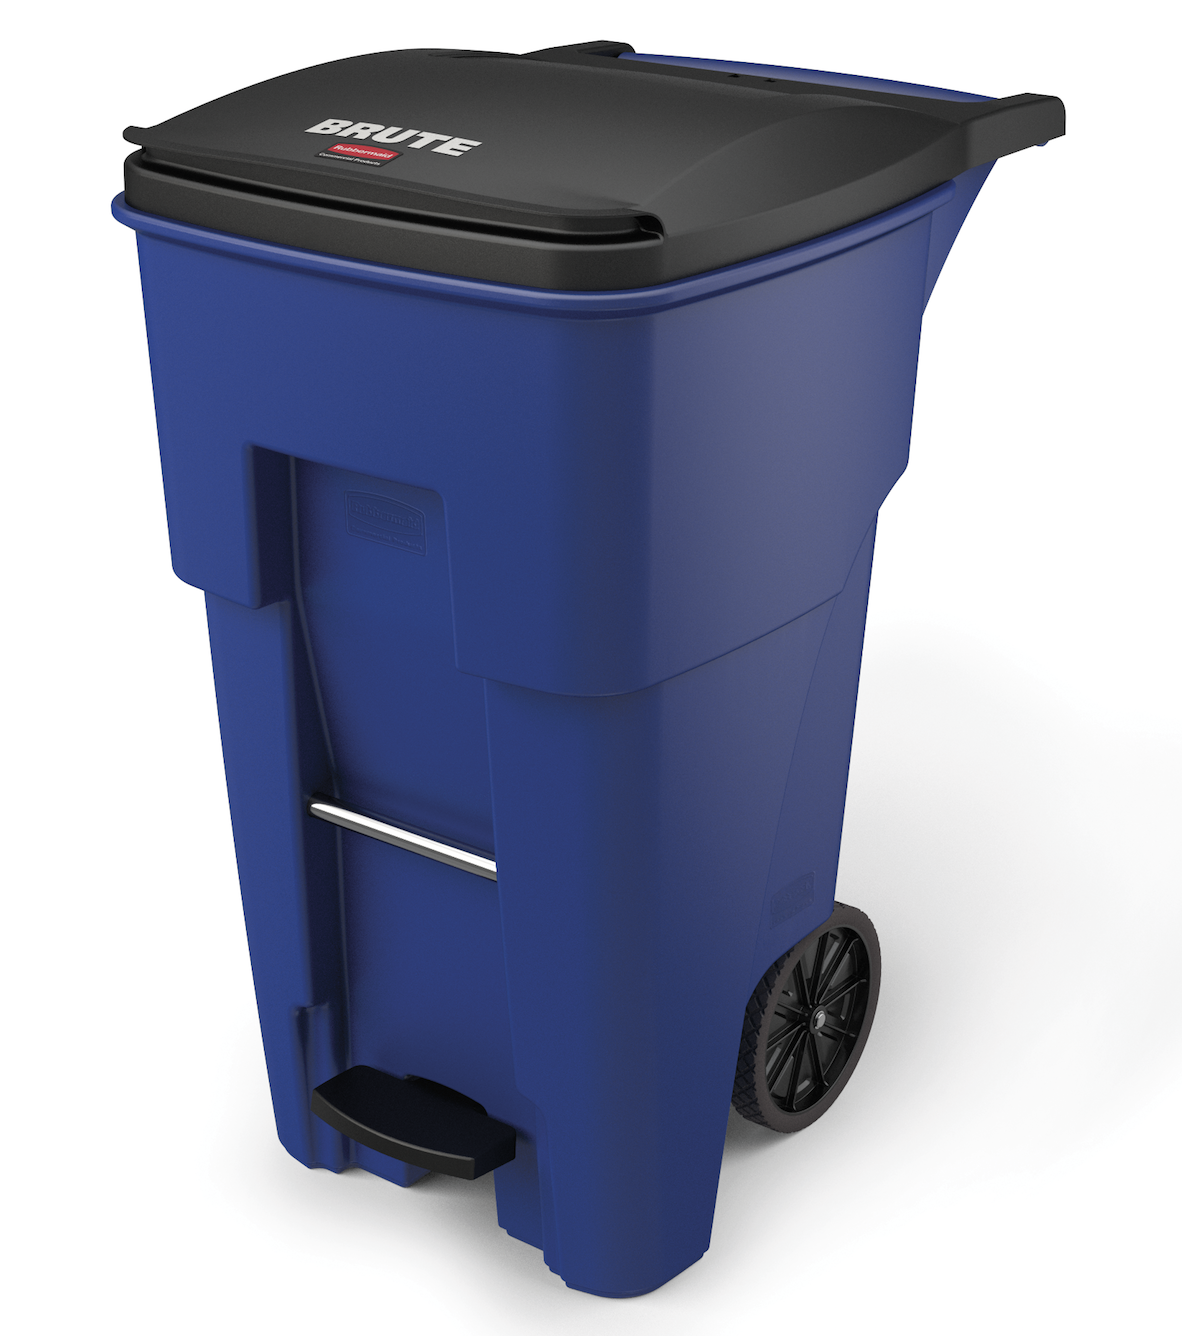 Rubbermaid 1971970 BRUTE Step-On Rollout Container 65 Gallon - Blue